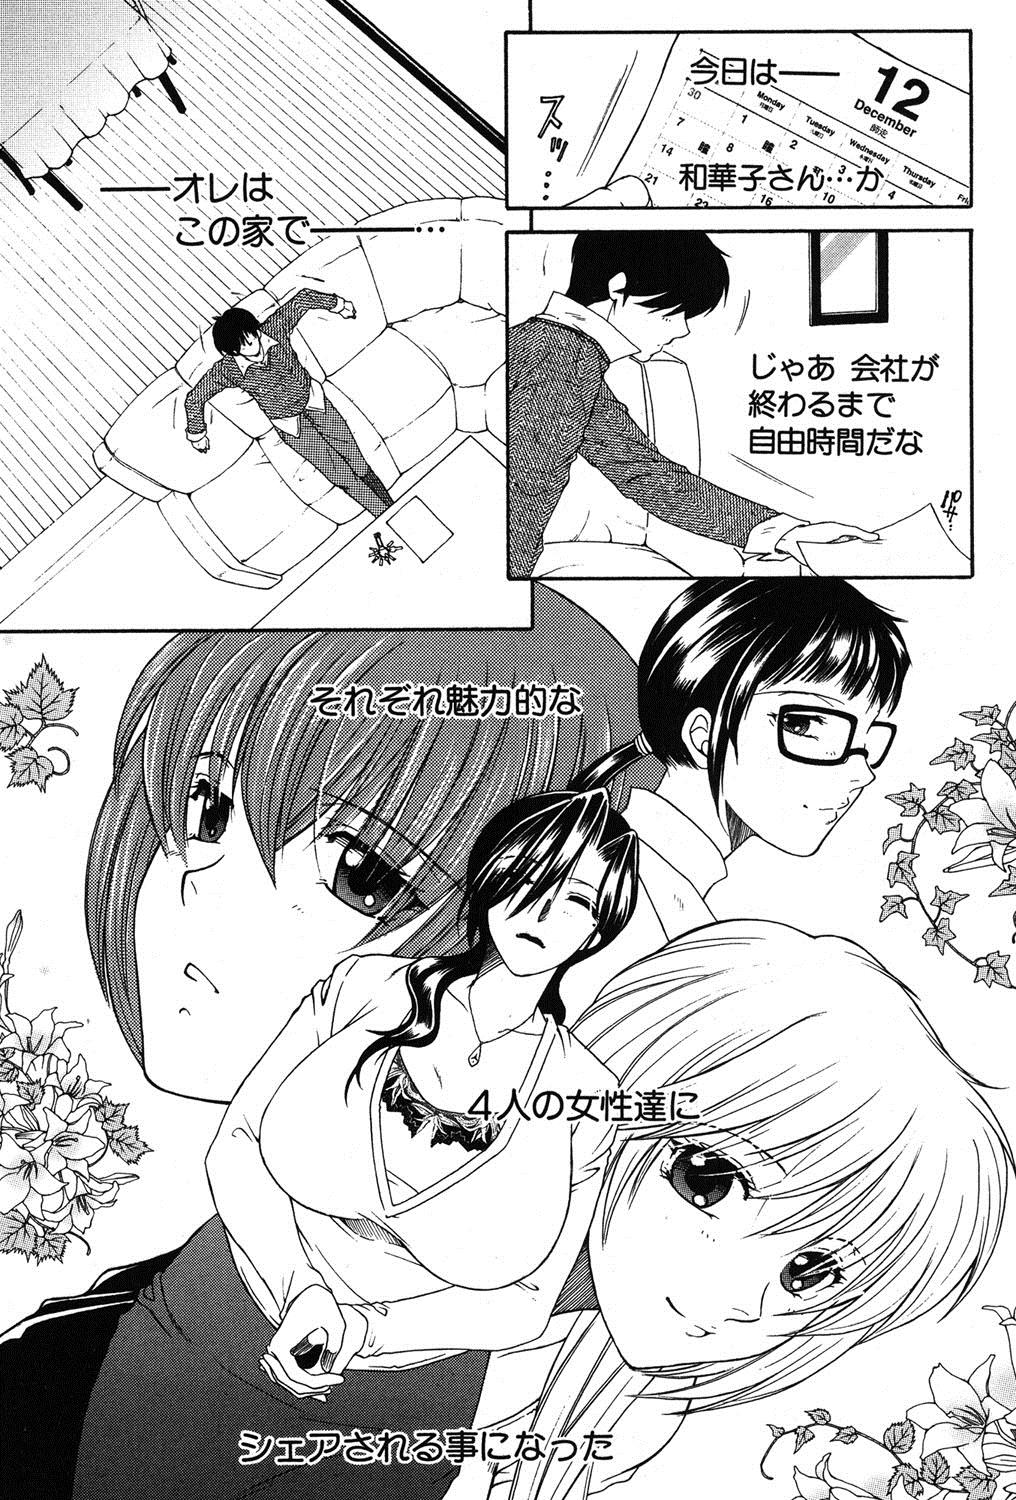 Outdoor Share House e Youkoso Black - Page 203